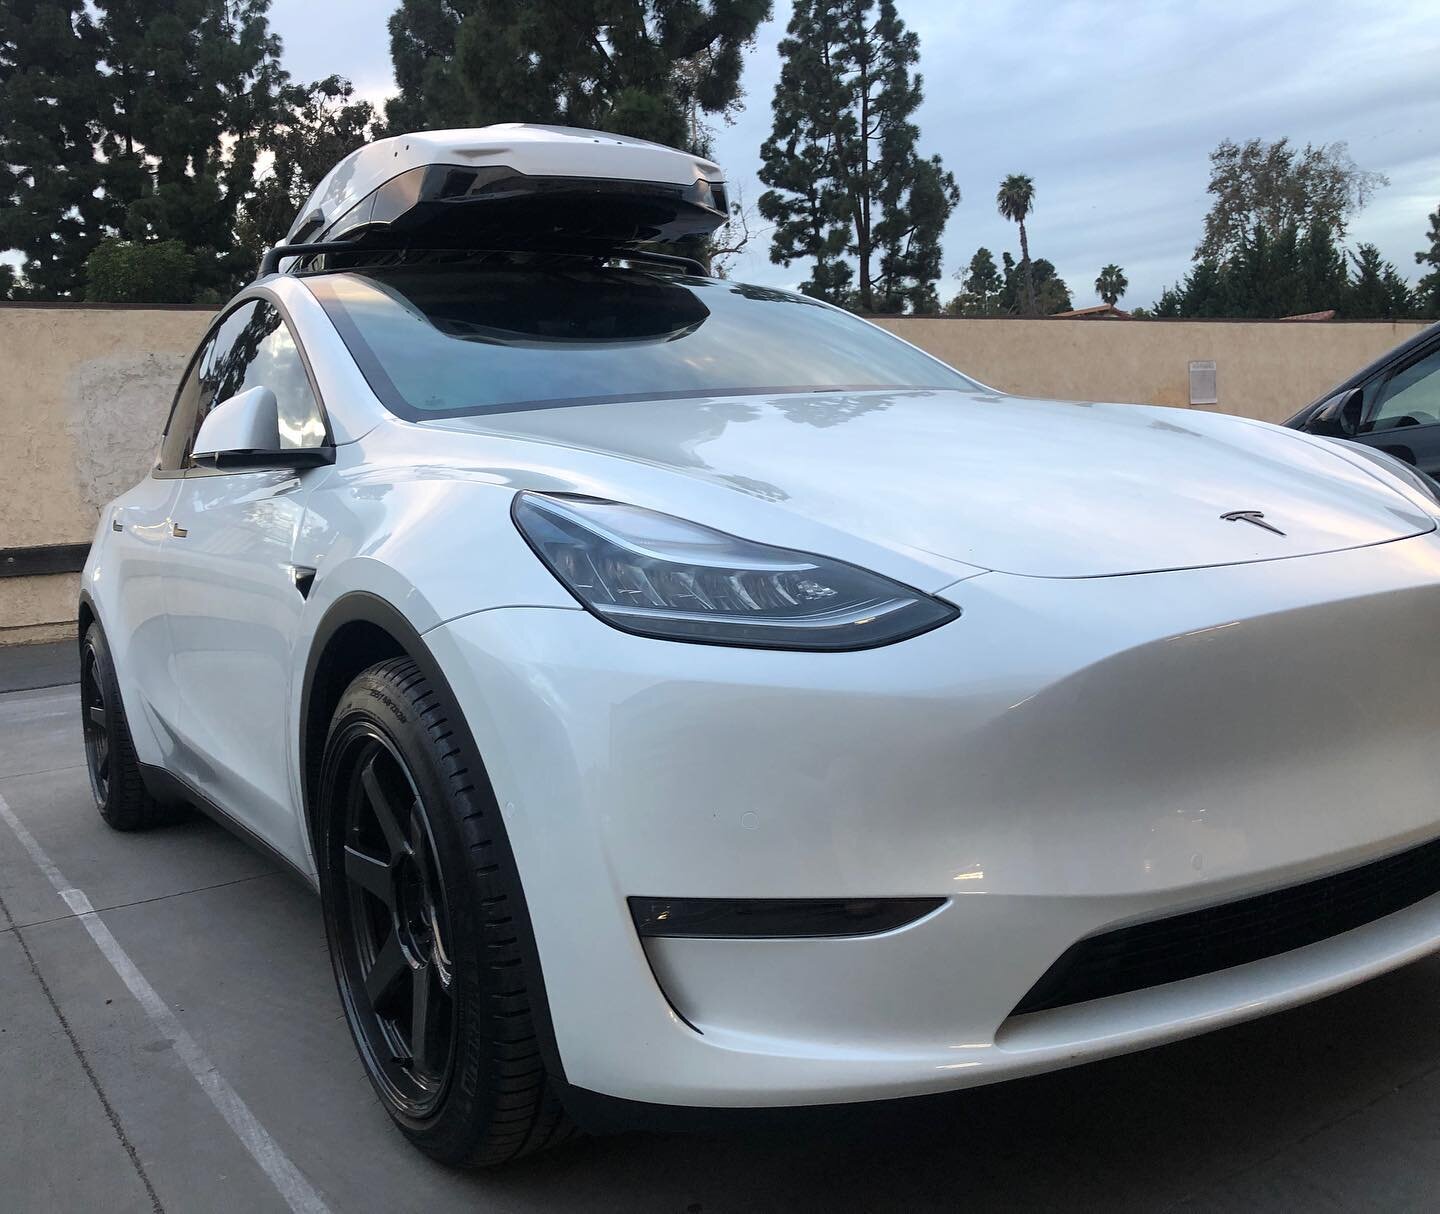 Model Y with a matching roof rack #ModelY #volkracing #volkwheels